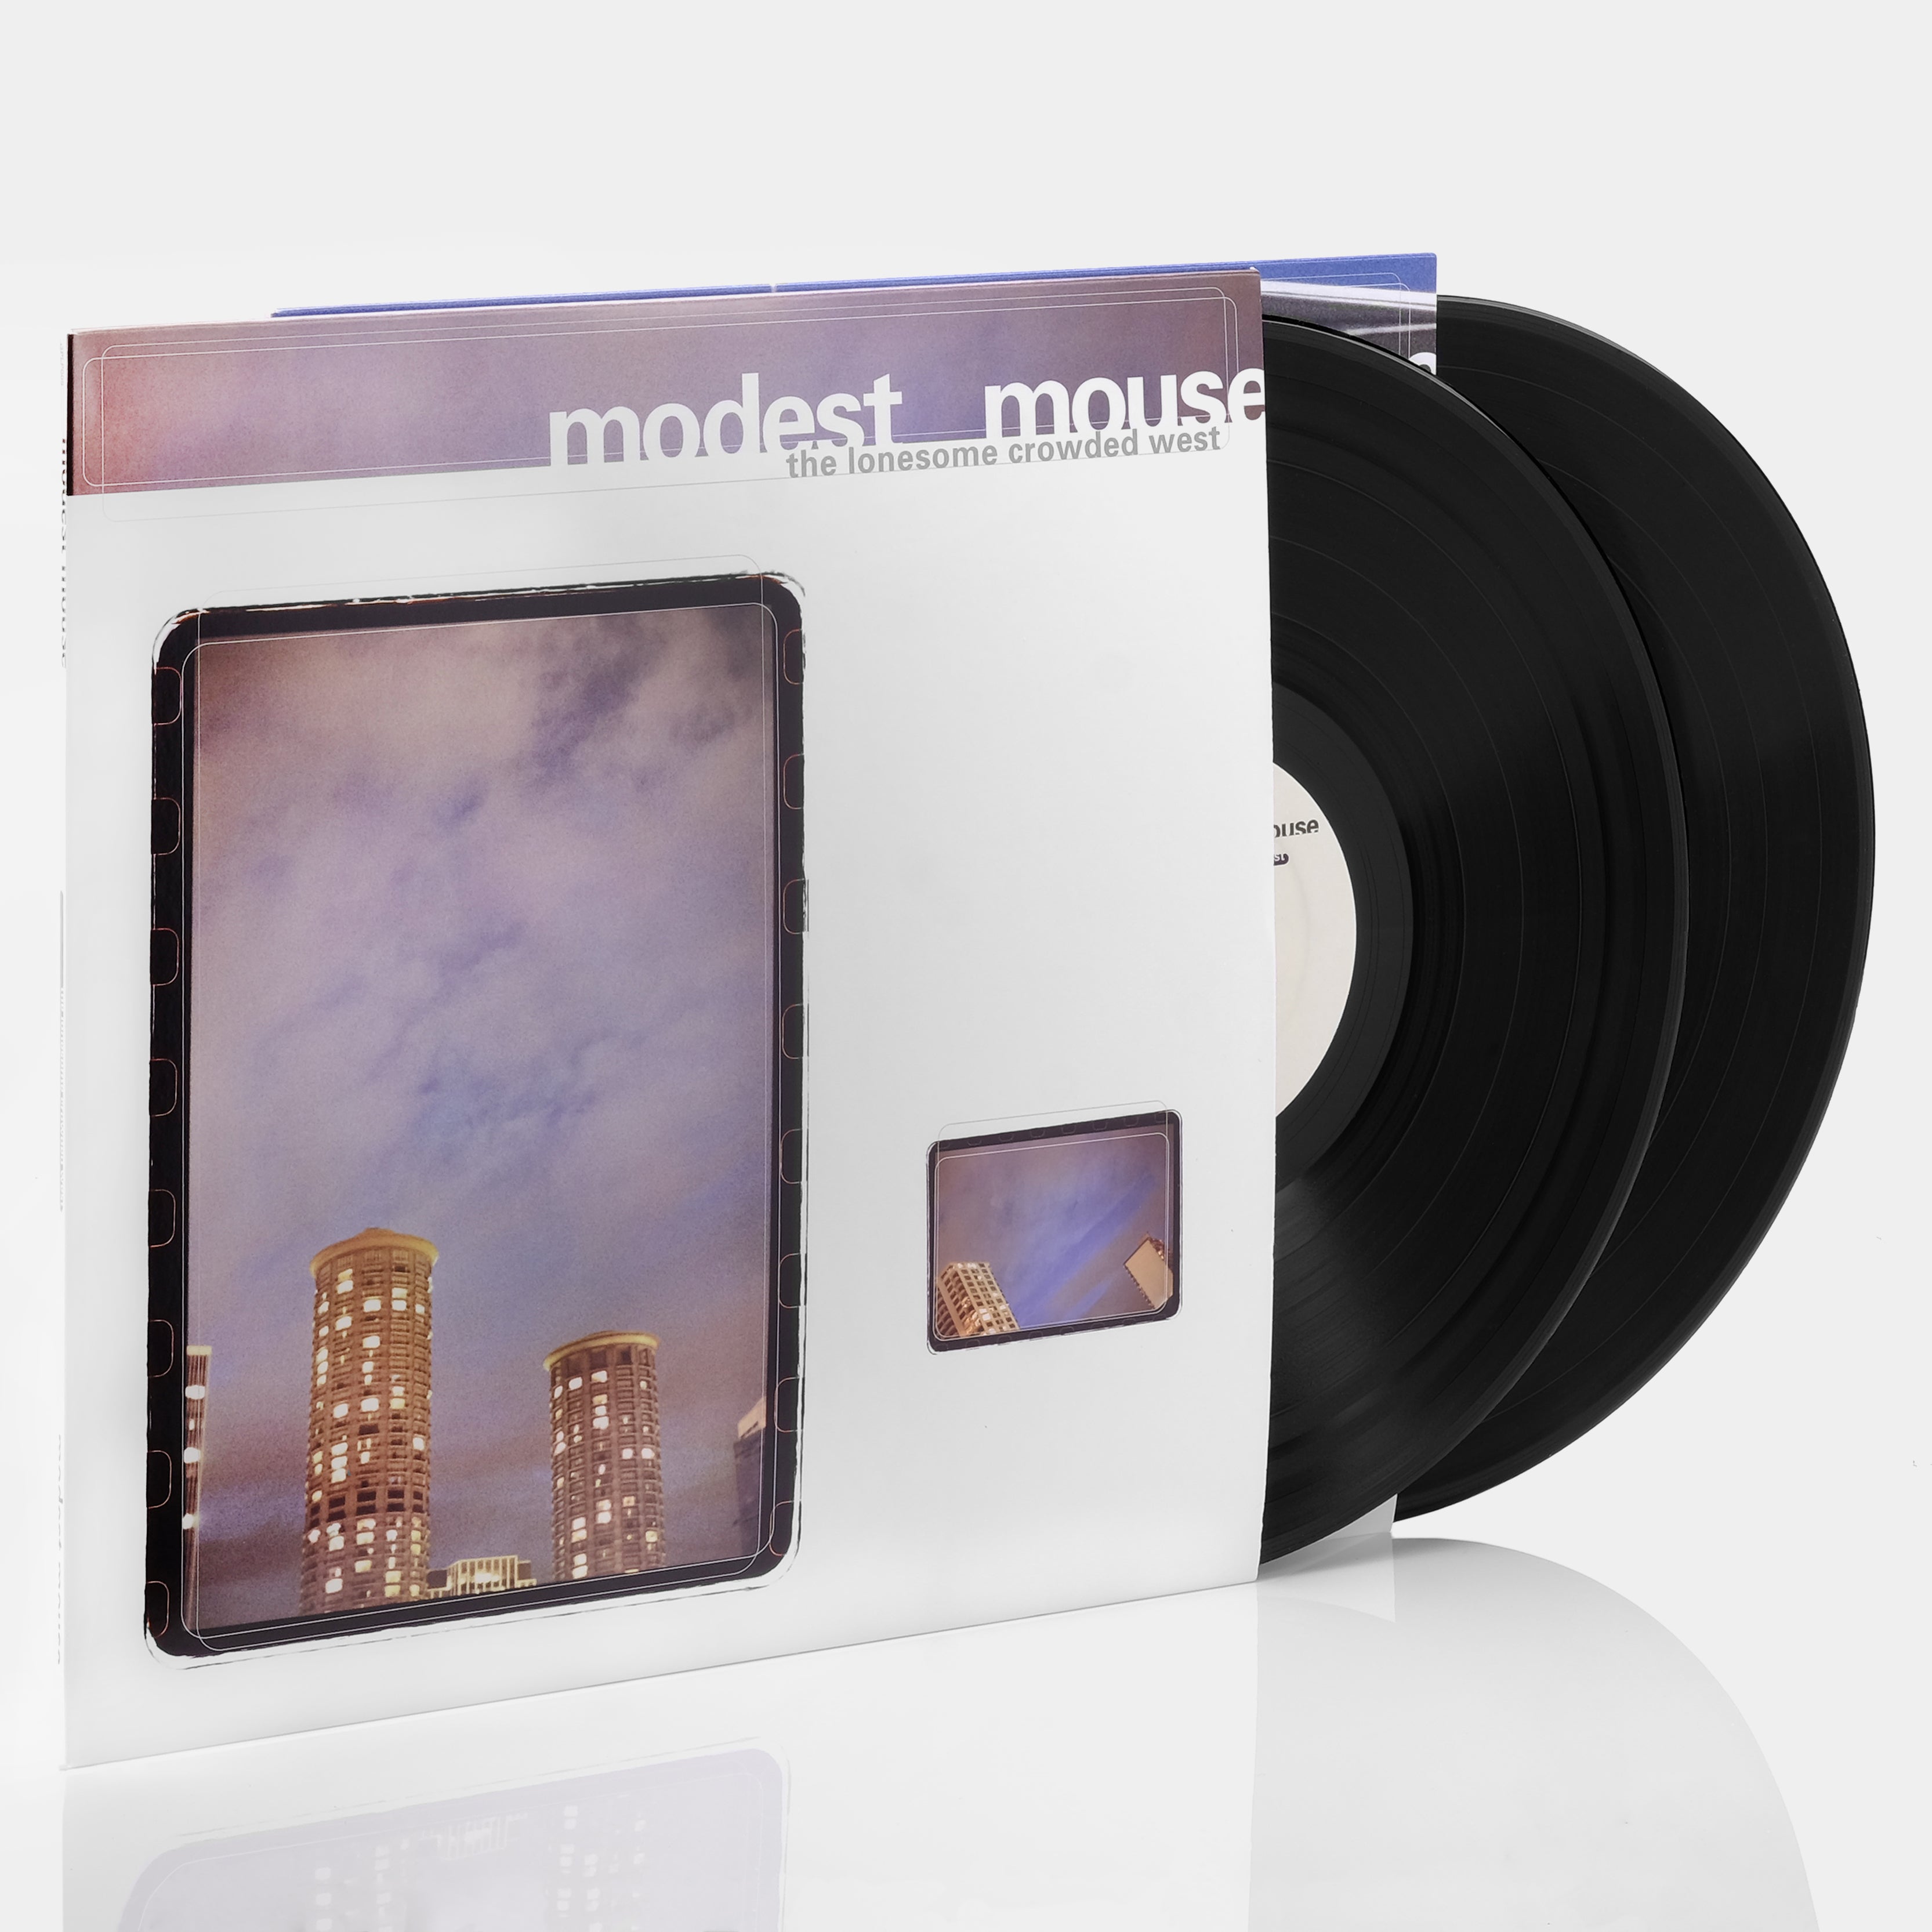 Modest Mouse - The Lonesome Crowded West 2xLP Vinyl Record